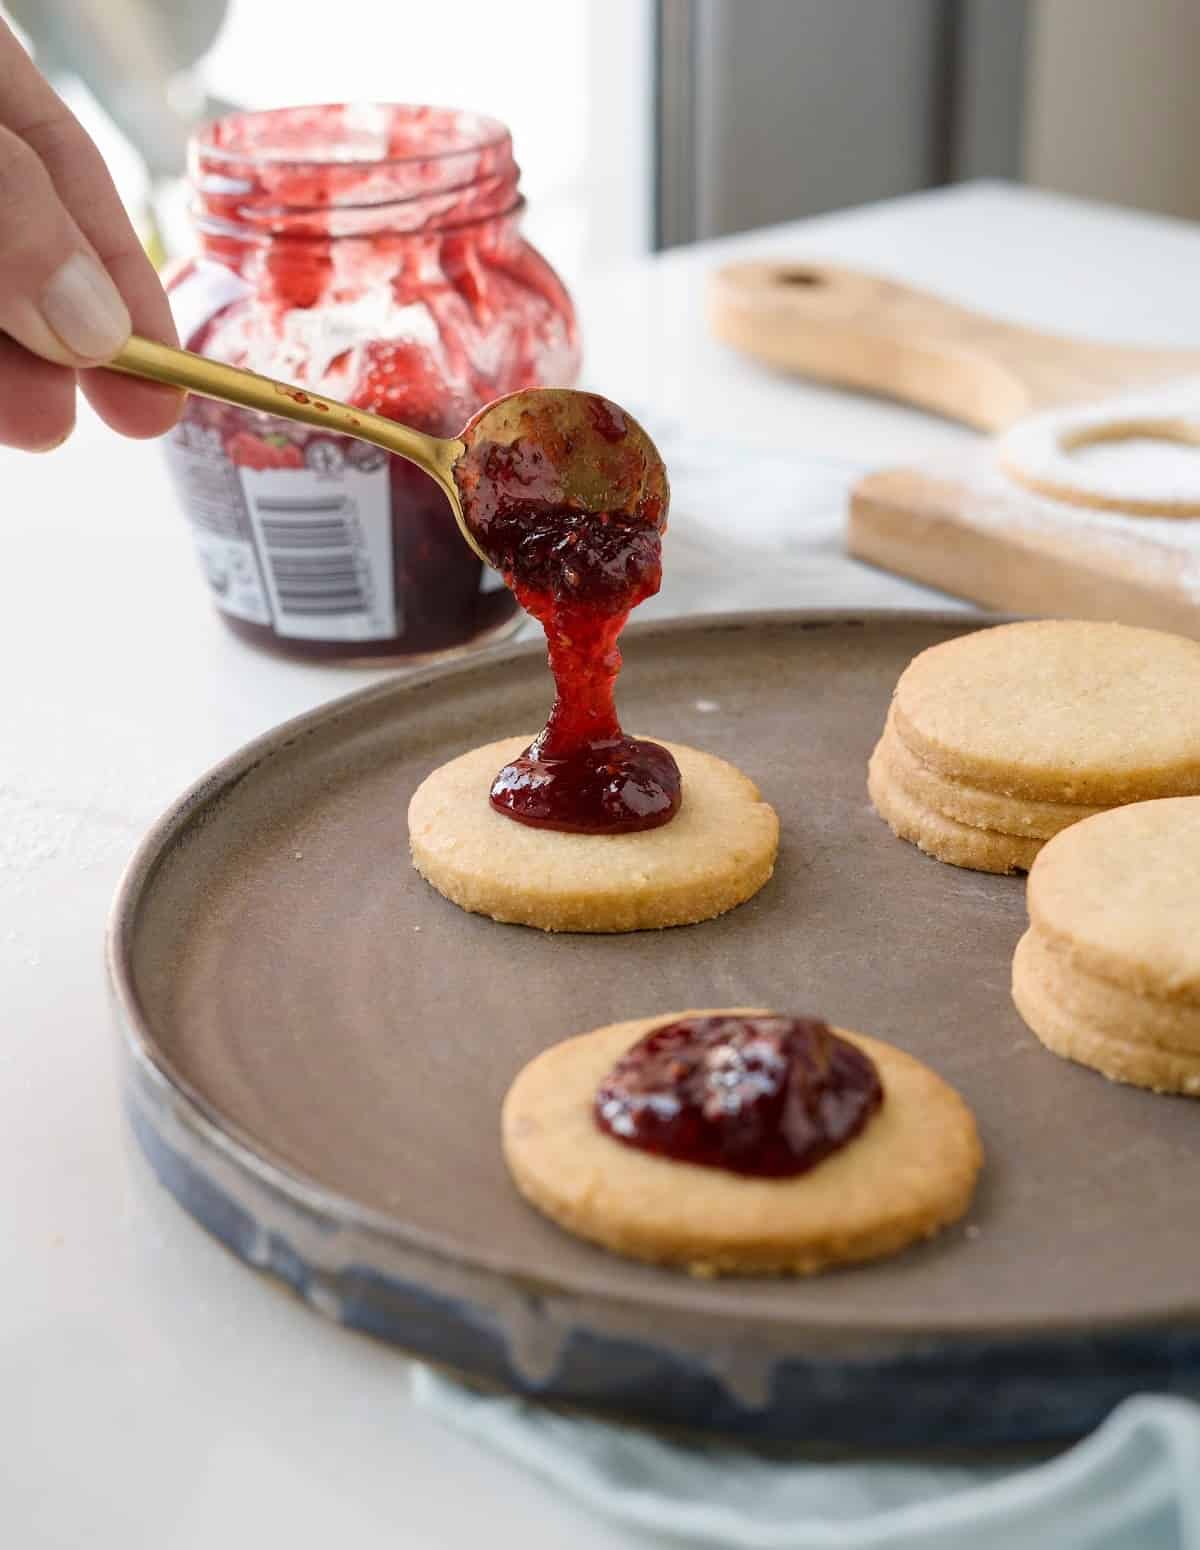 Placing a teaspoon of raspberry jam on cookie rounds on a brown plate. A jam jar. White surface.